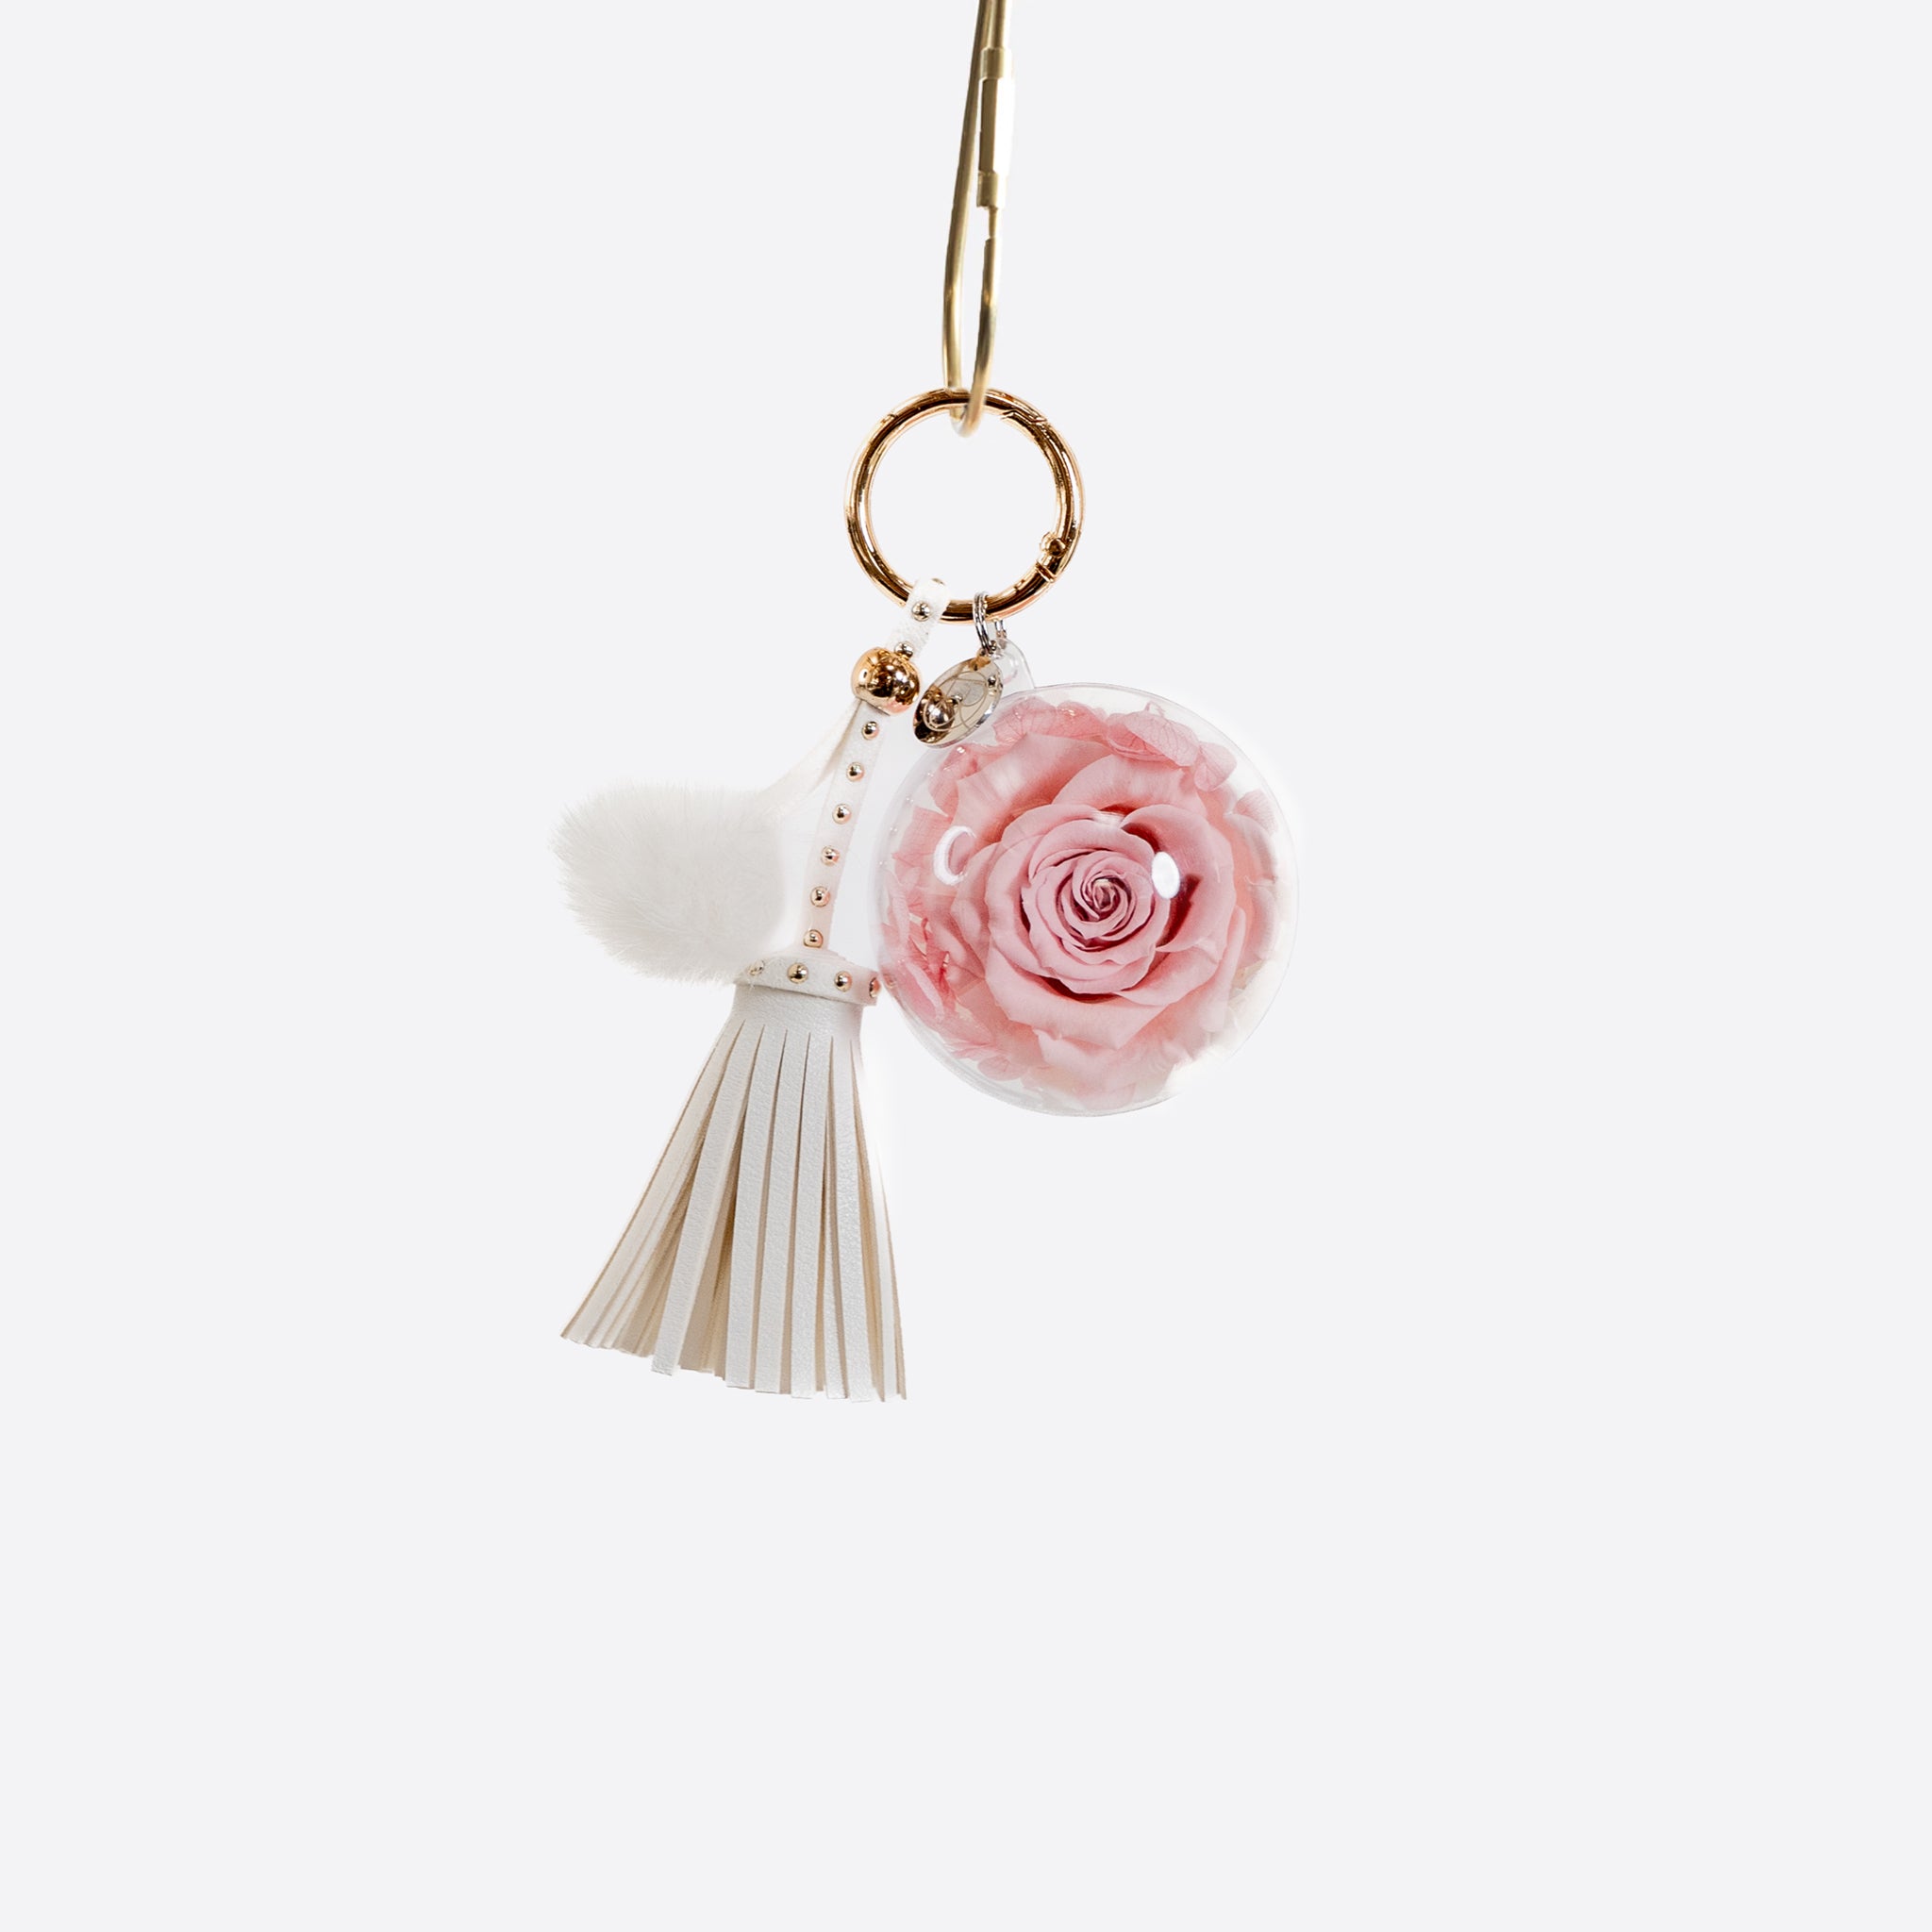 The Only Roses Everlasting Preserved Rose Unicorn Figure Keychain